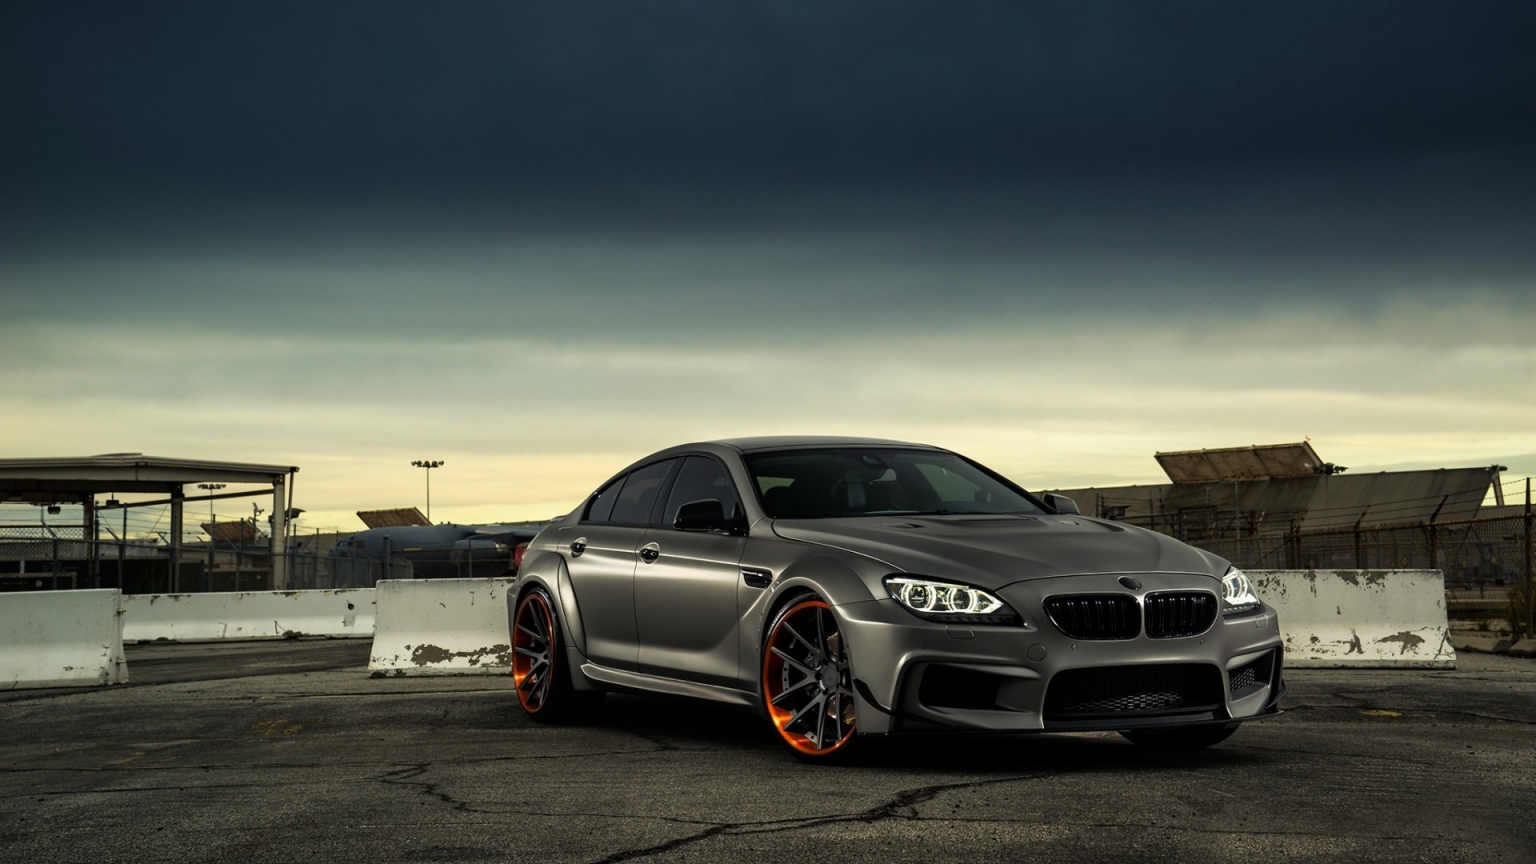 Gorgeous BMW M6 for 1536 x 864 HDTV resolution